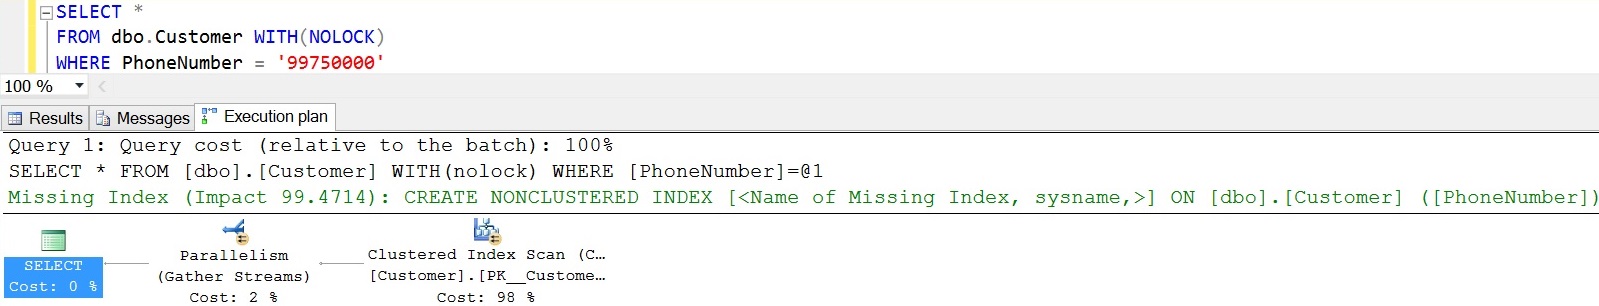 First Execution Plan without Index on PhoneNumber